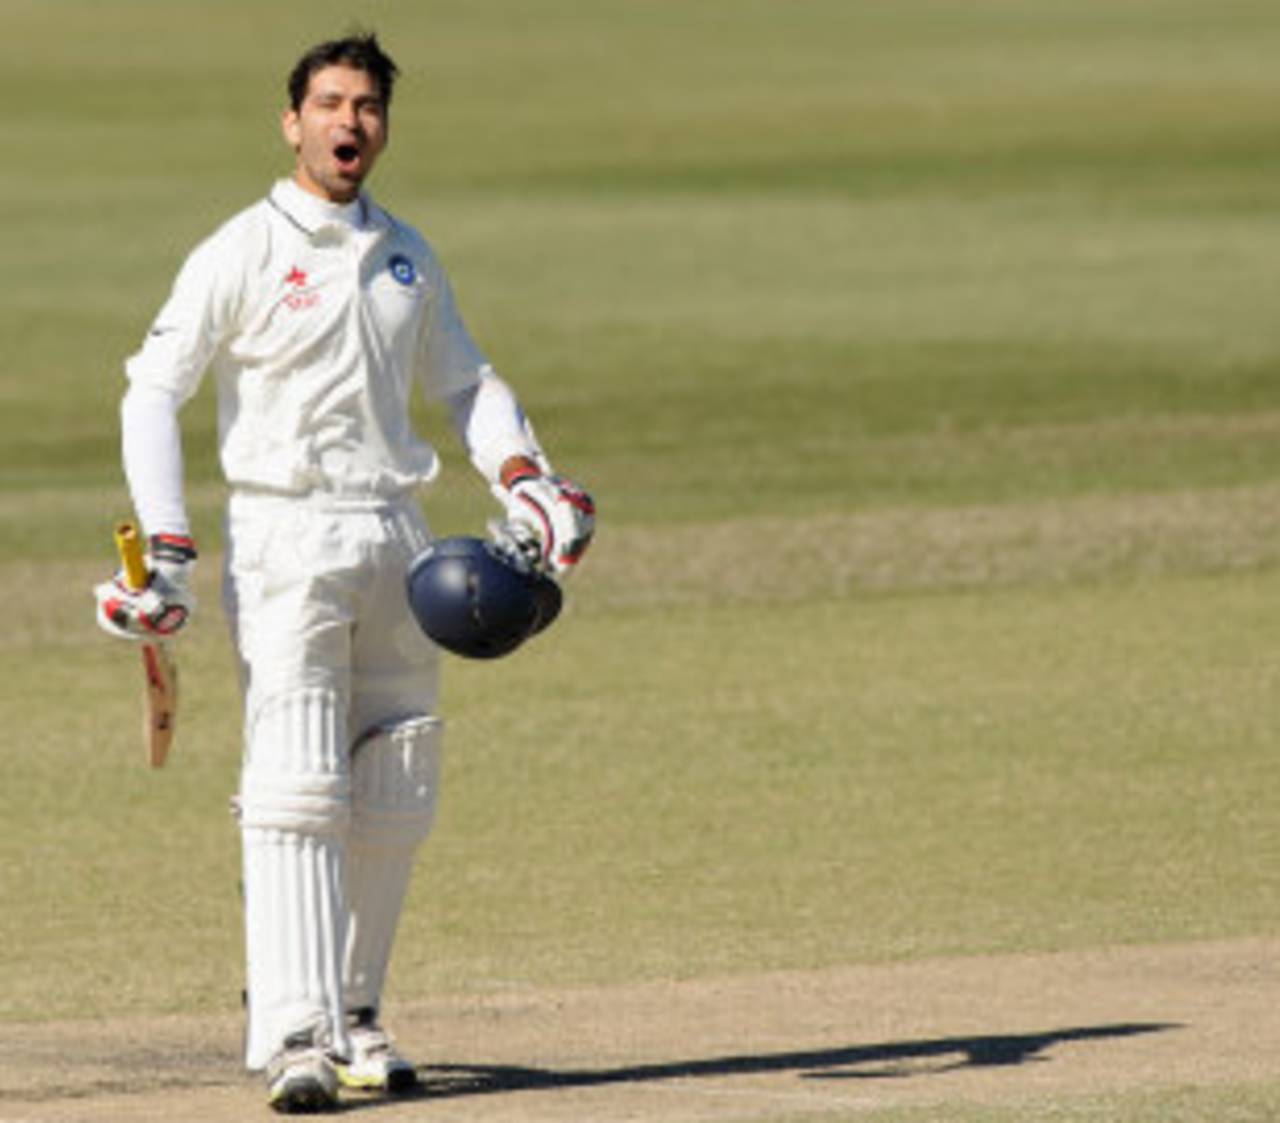 Naman Ojha has scored 1545 runs in his previous 11 first-class matches at an average of 90.88 with eight centuries, including three double-hundreds&nbsp;&nbsp;&bull;&nbsp;&nbsp;Getty Images